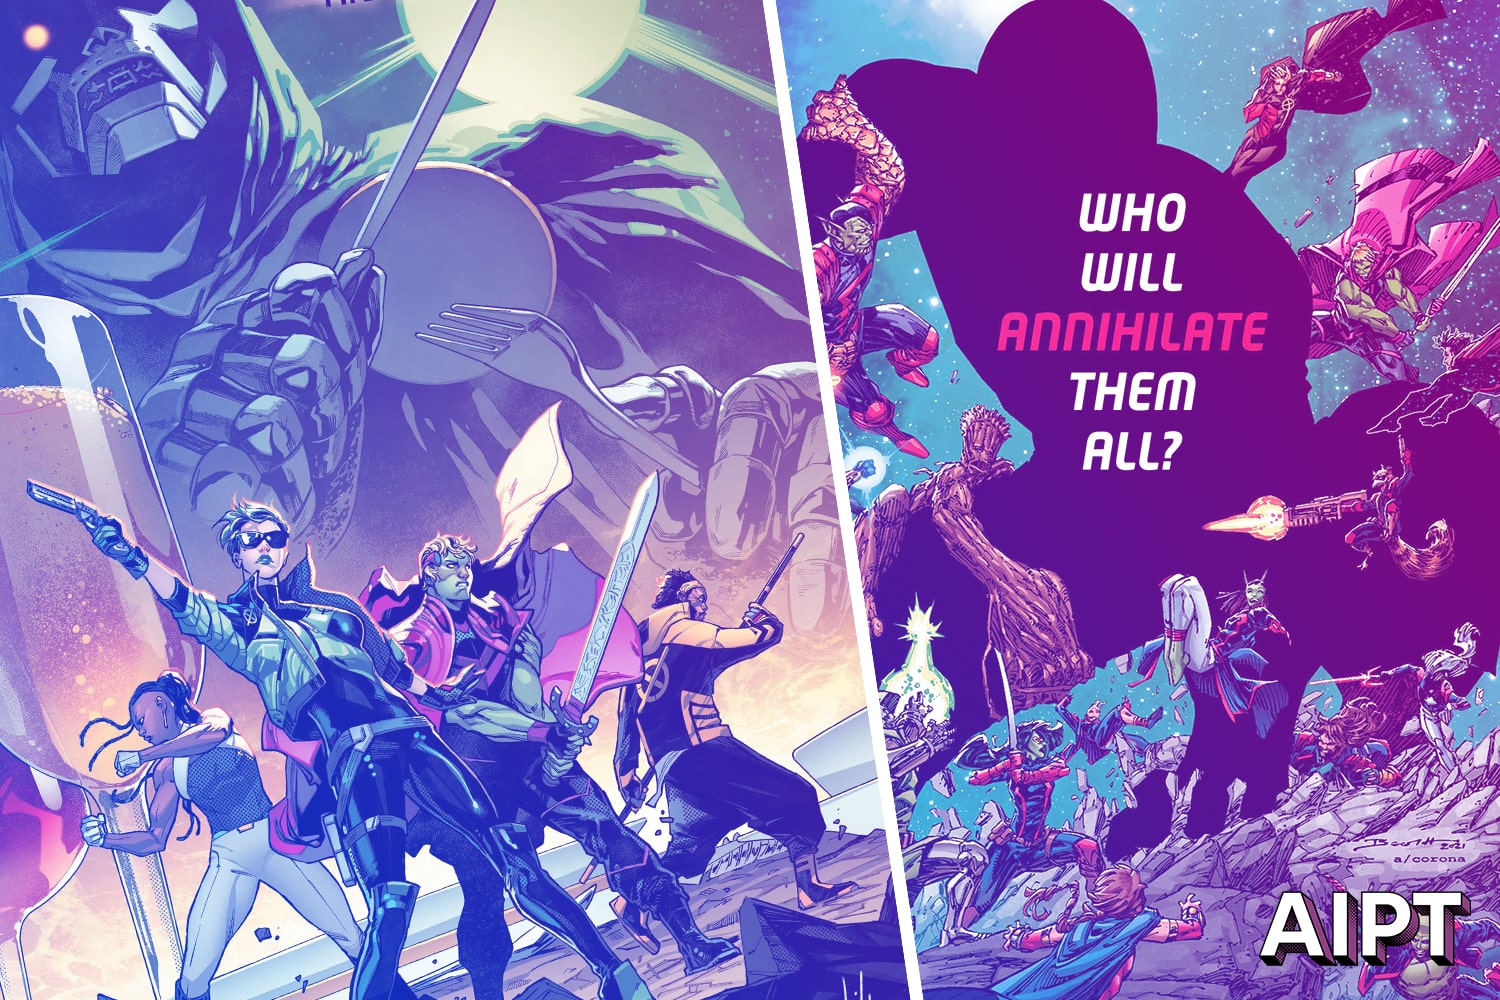 Marvel kicking off 'The Last Annihilation' this July via Al Ewing's Space Age